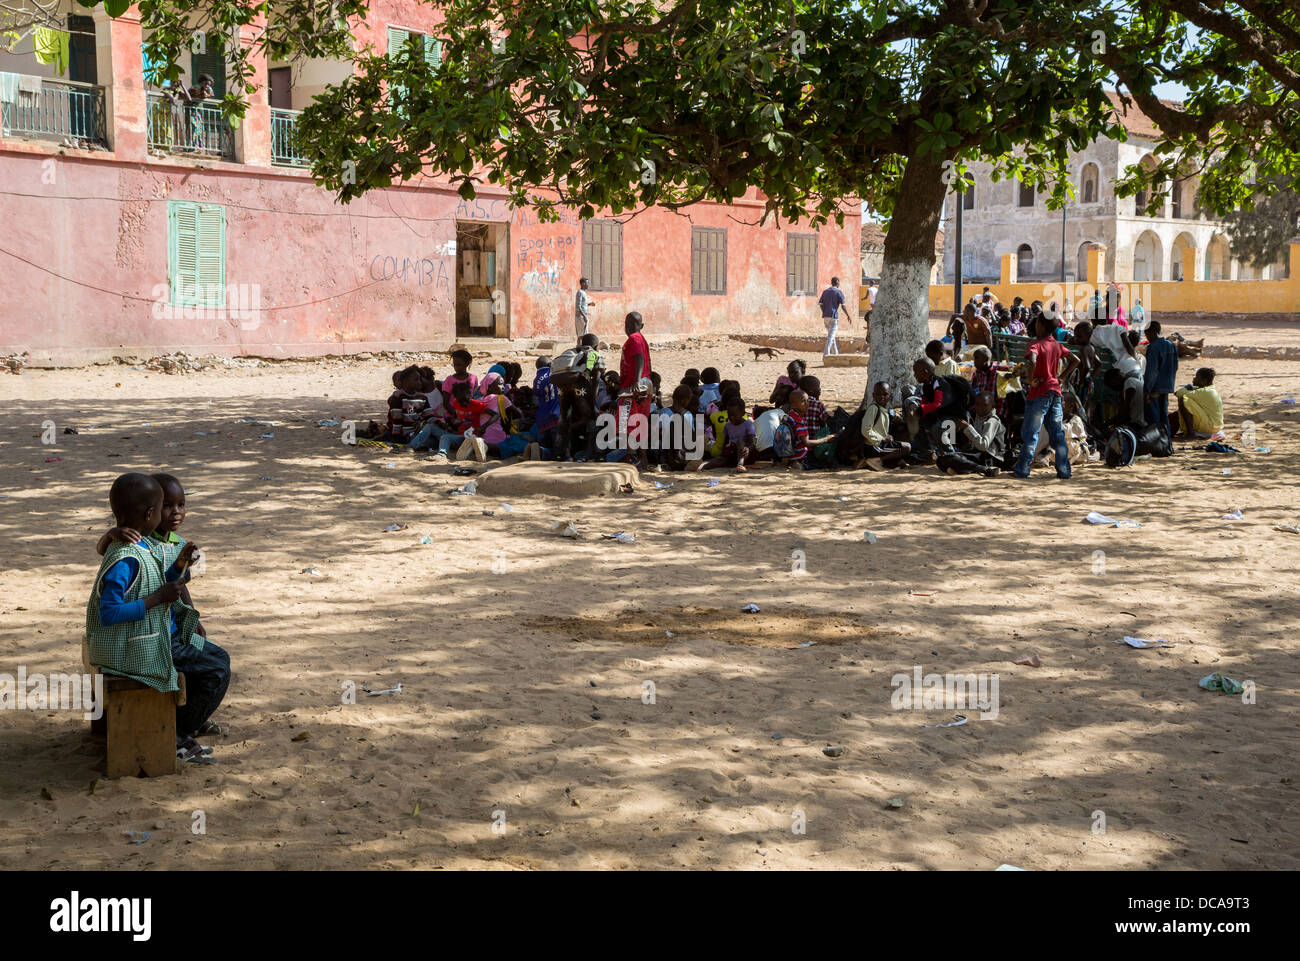 During Mid-day Sun People Seek Shade under Trees for their Conversations, Goree Island, Senegal. Stock Photo